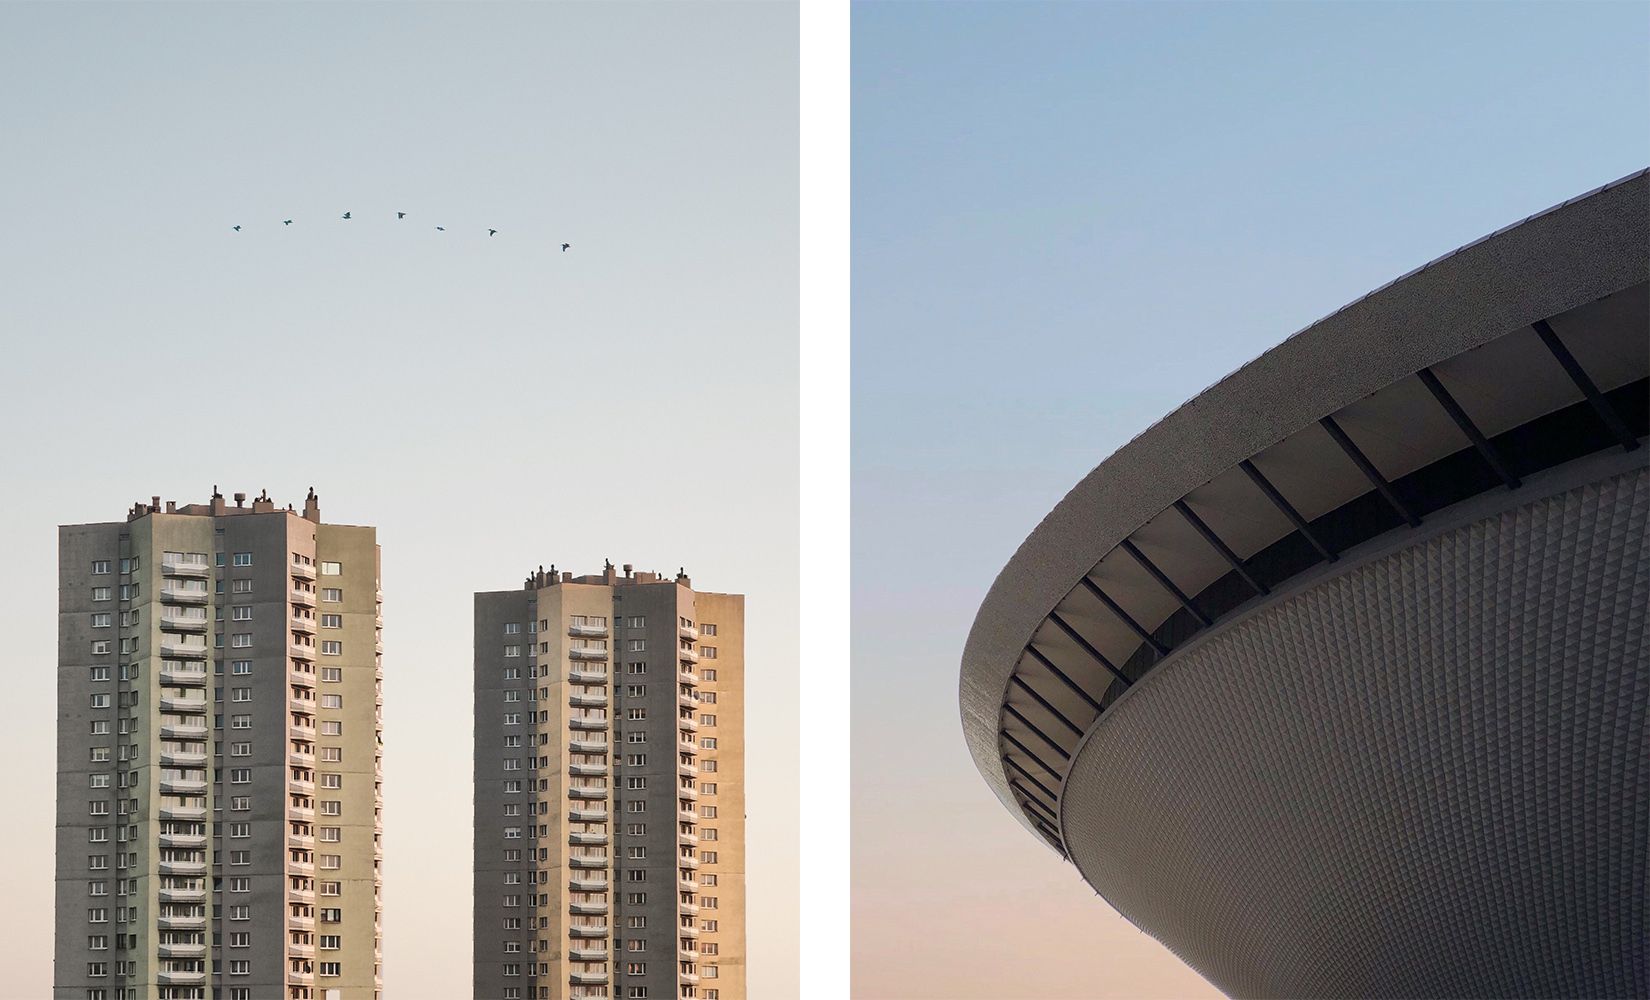 Photographing buildings as a way of self-expression | Kamil Philipiak